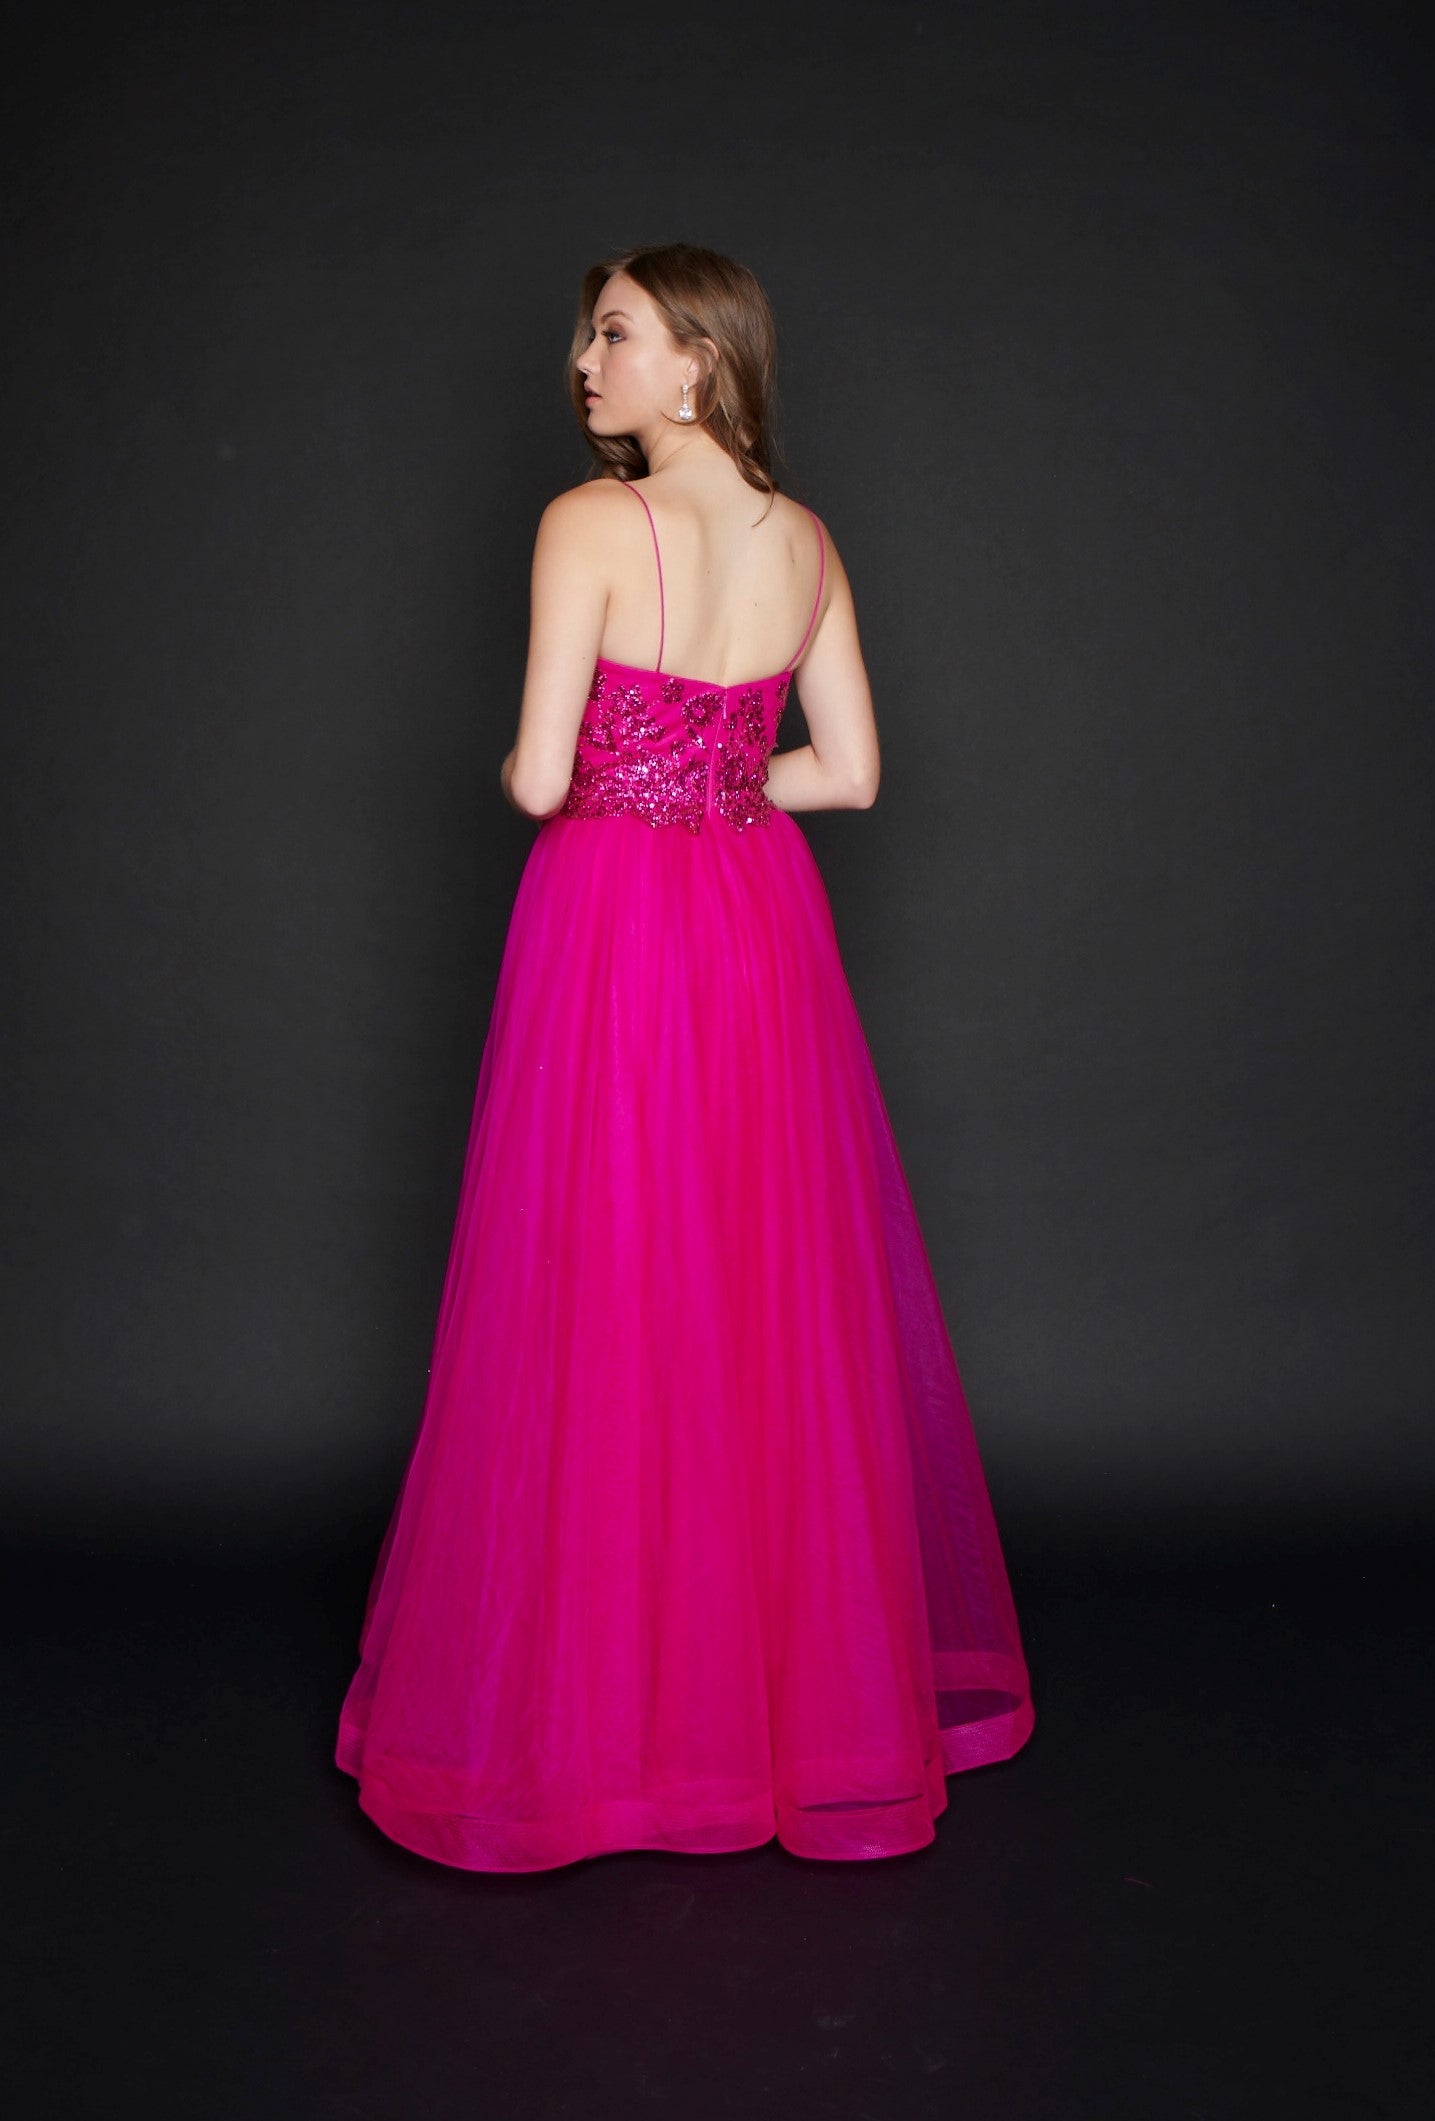 Nina Canacci 1522 Long V neck Pageant Prom dress or Evening Gown  Long A Line Glitter Prom Dress Formal Party Gown V Neck   Available Color:  Magenta, Steel blue  Available Size- 0-18